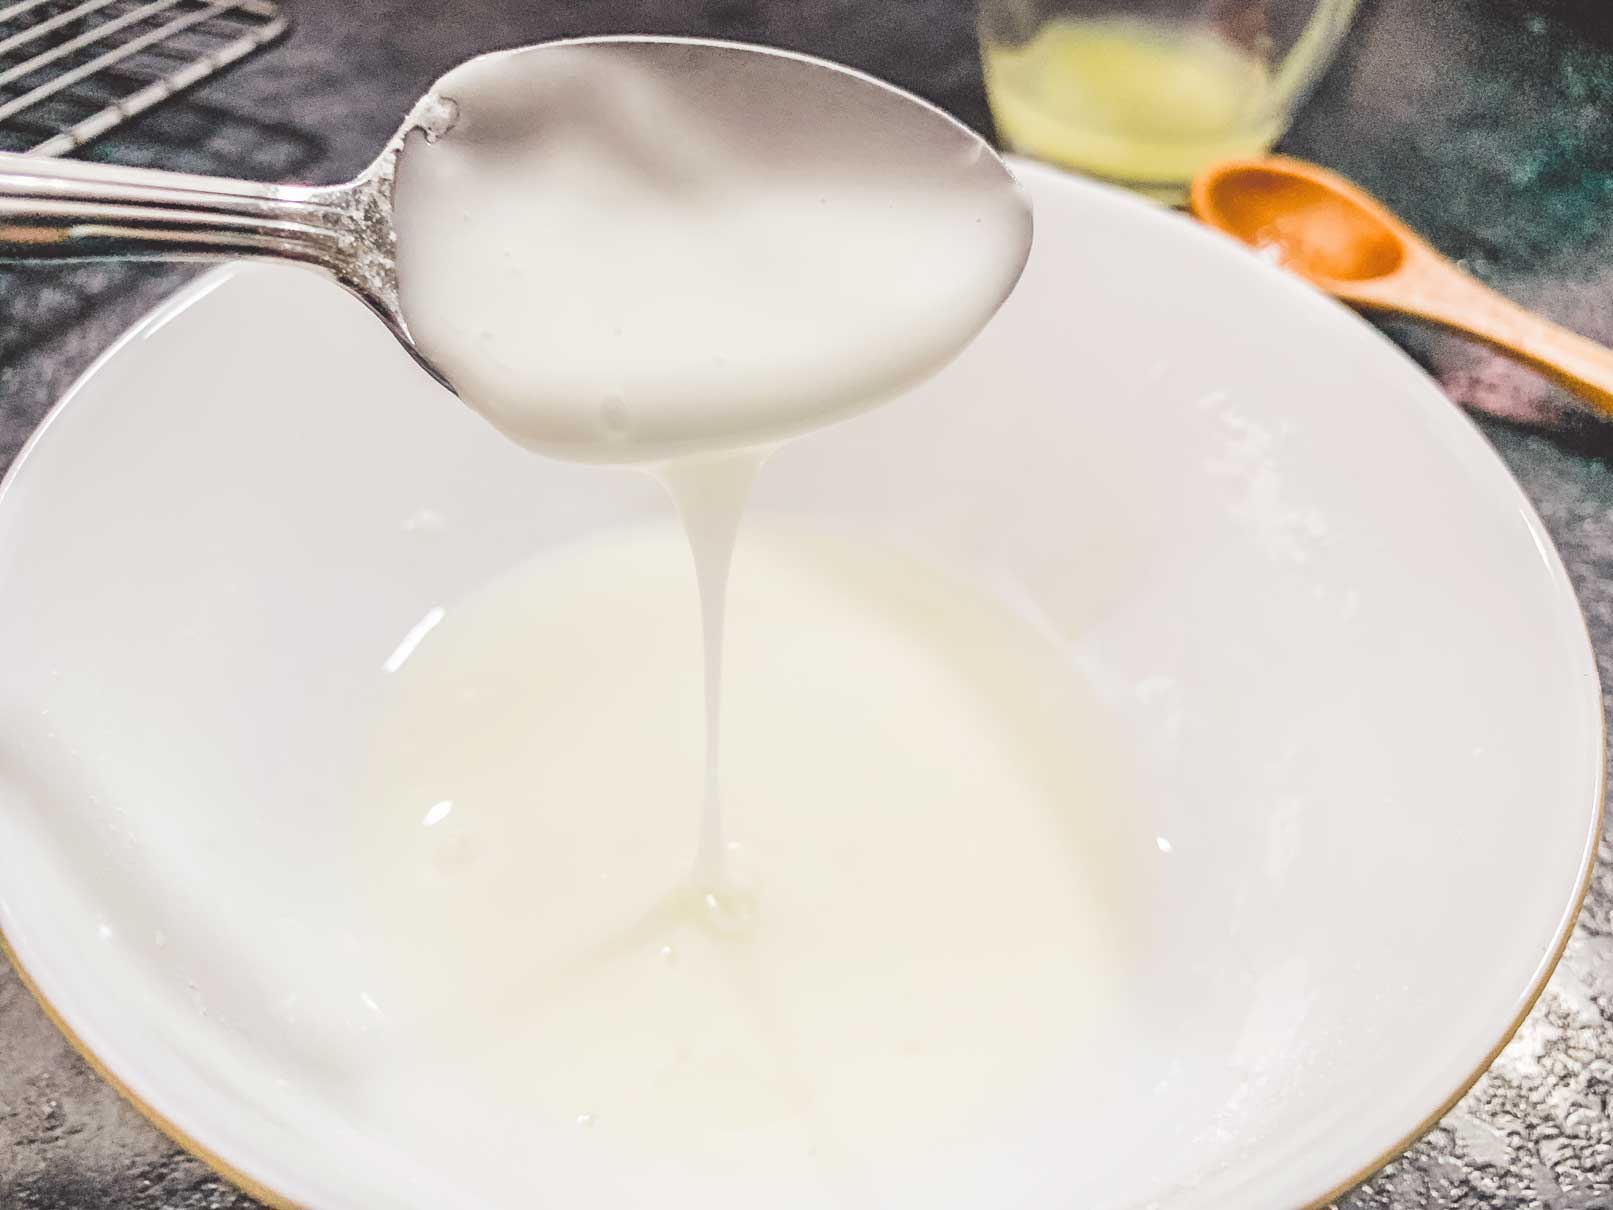 mixing icing sugar and lemon juice together in a bowl